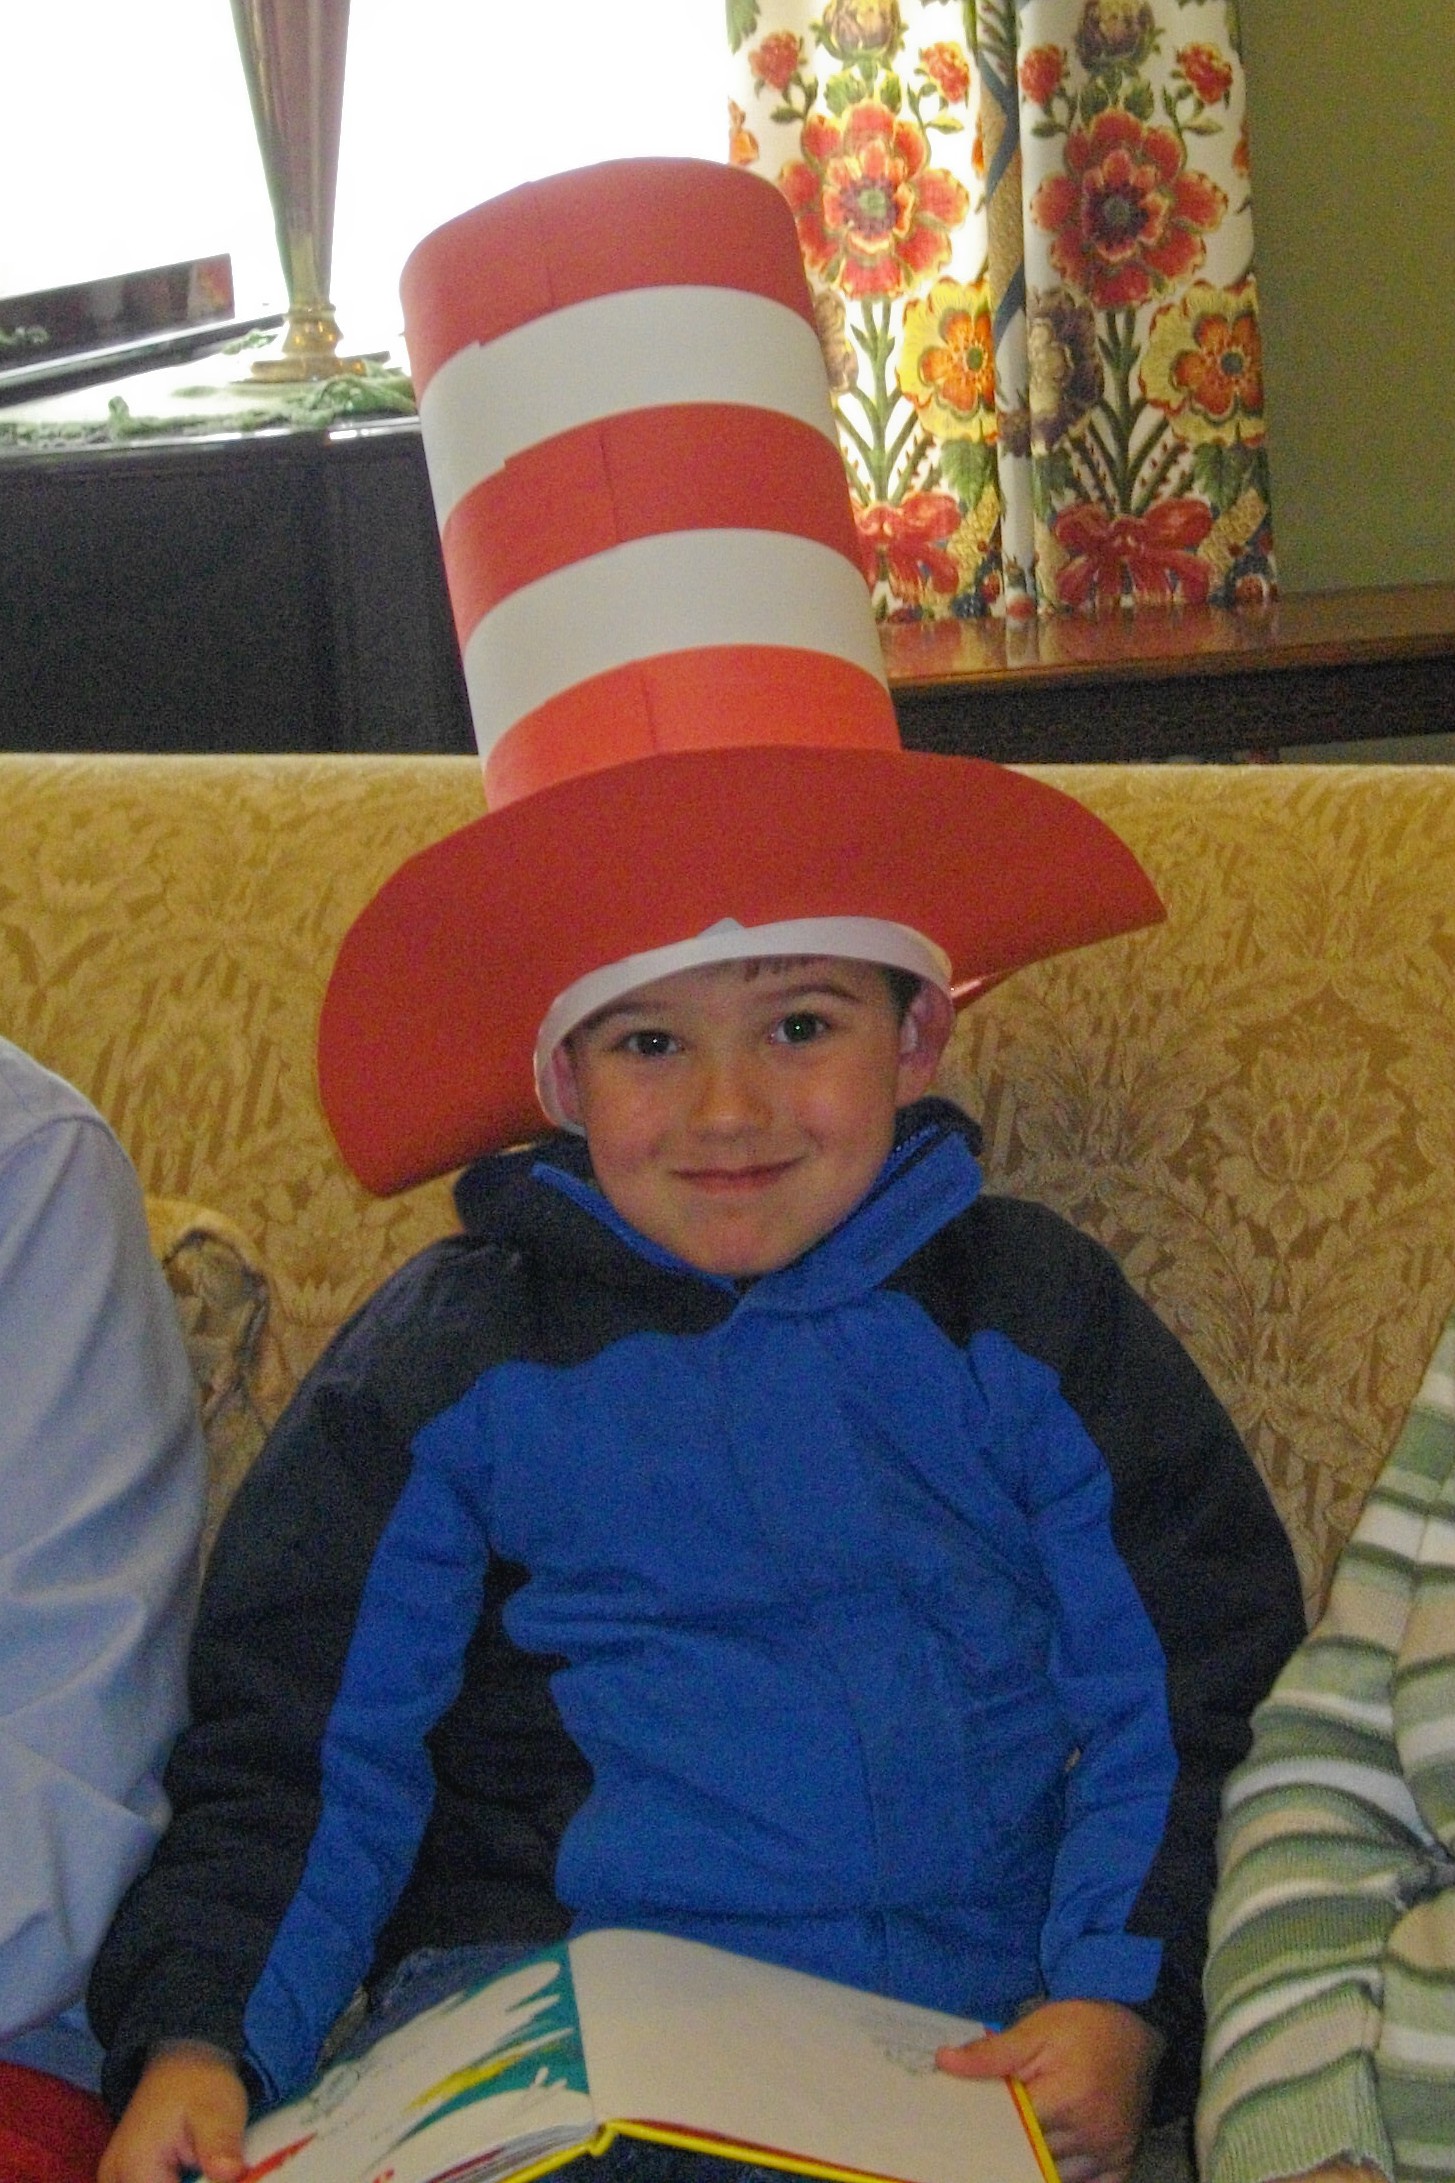 Cat in the Hat at William Hill Gardens